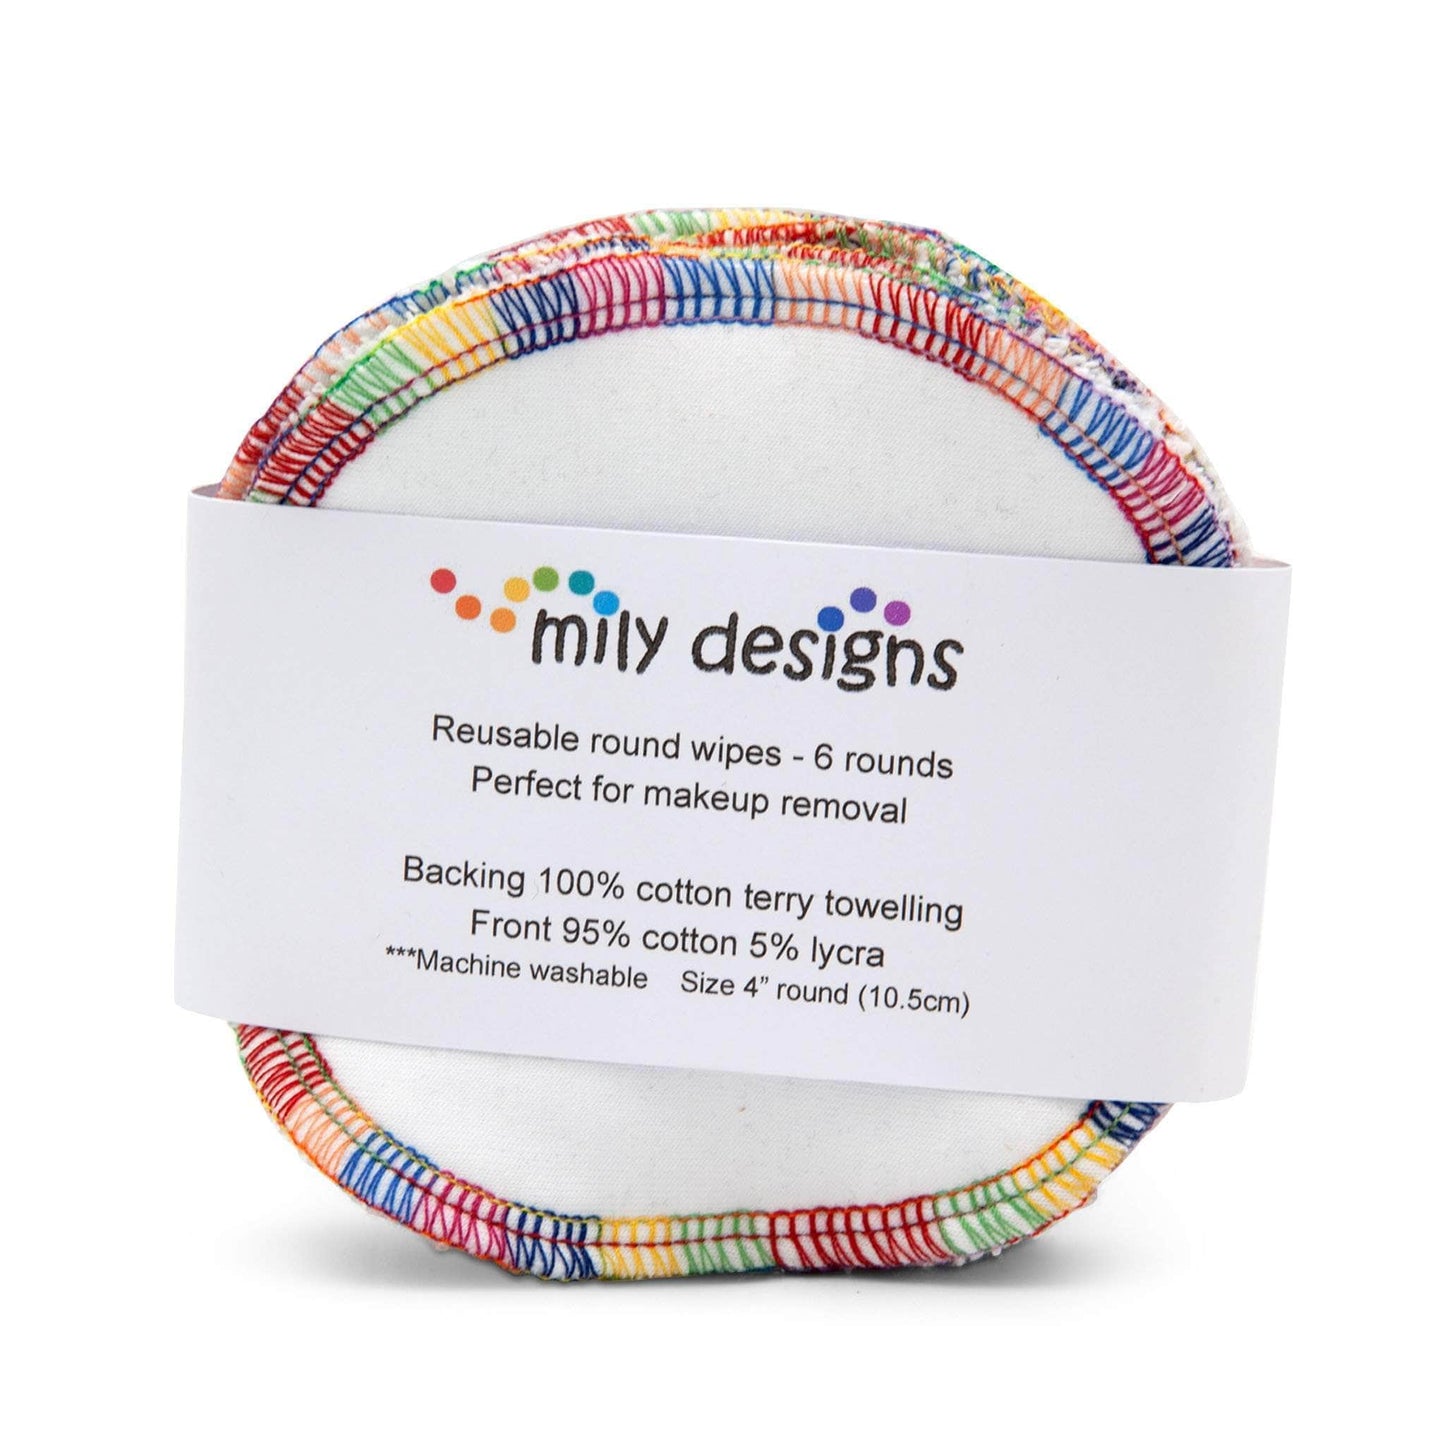 Mily Designs Facial Rounds Mily Designs Facial Rounds - 6 Pack - Love is Love Pride Edition